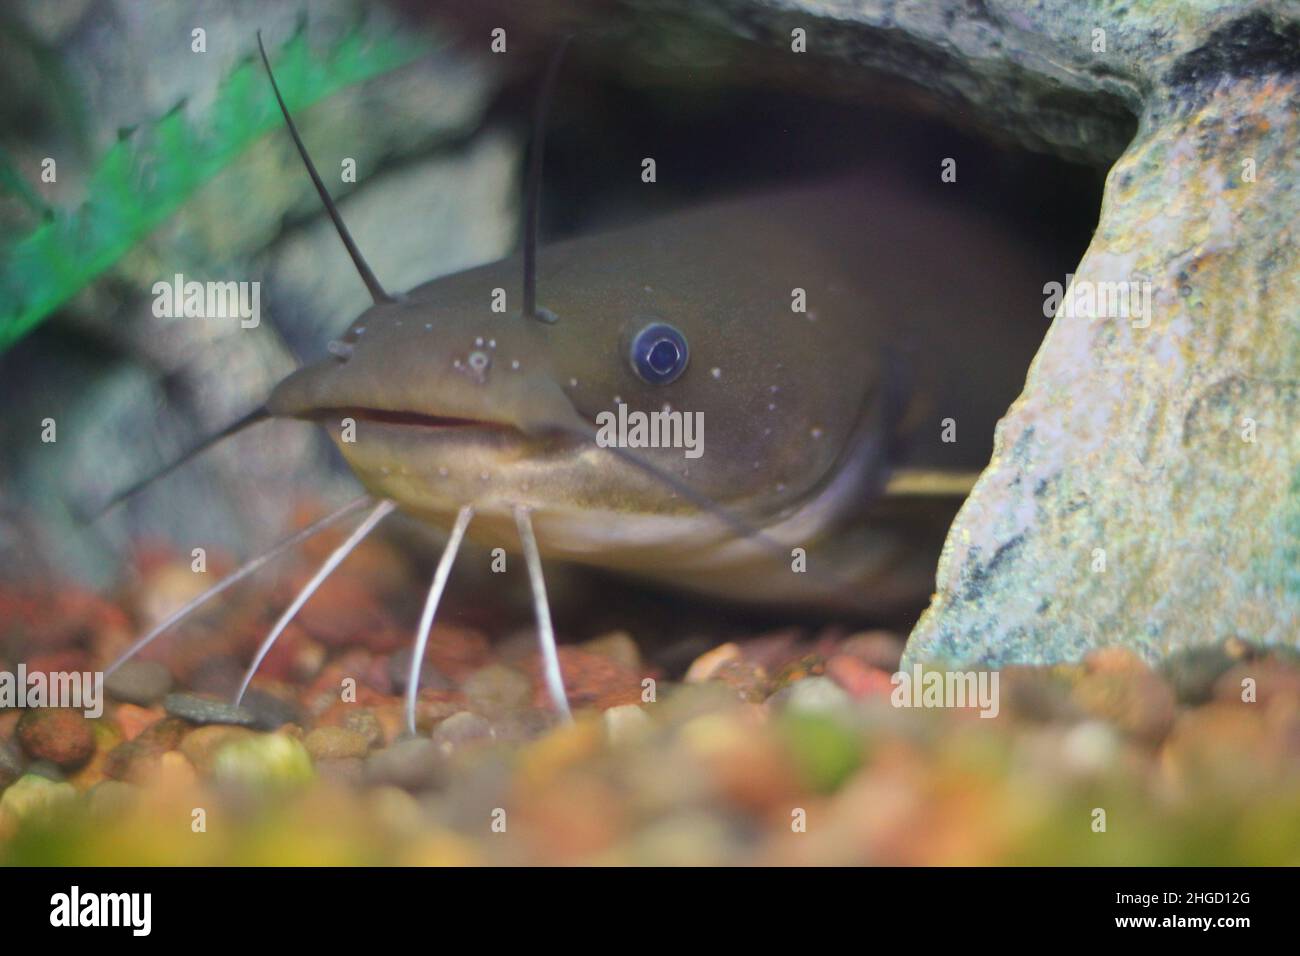 A cute wild catfish hiding in its secret lair. Stock Photo